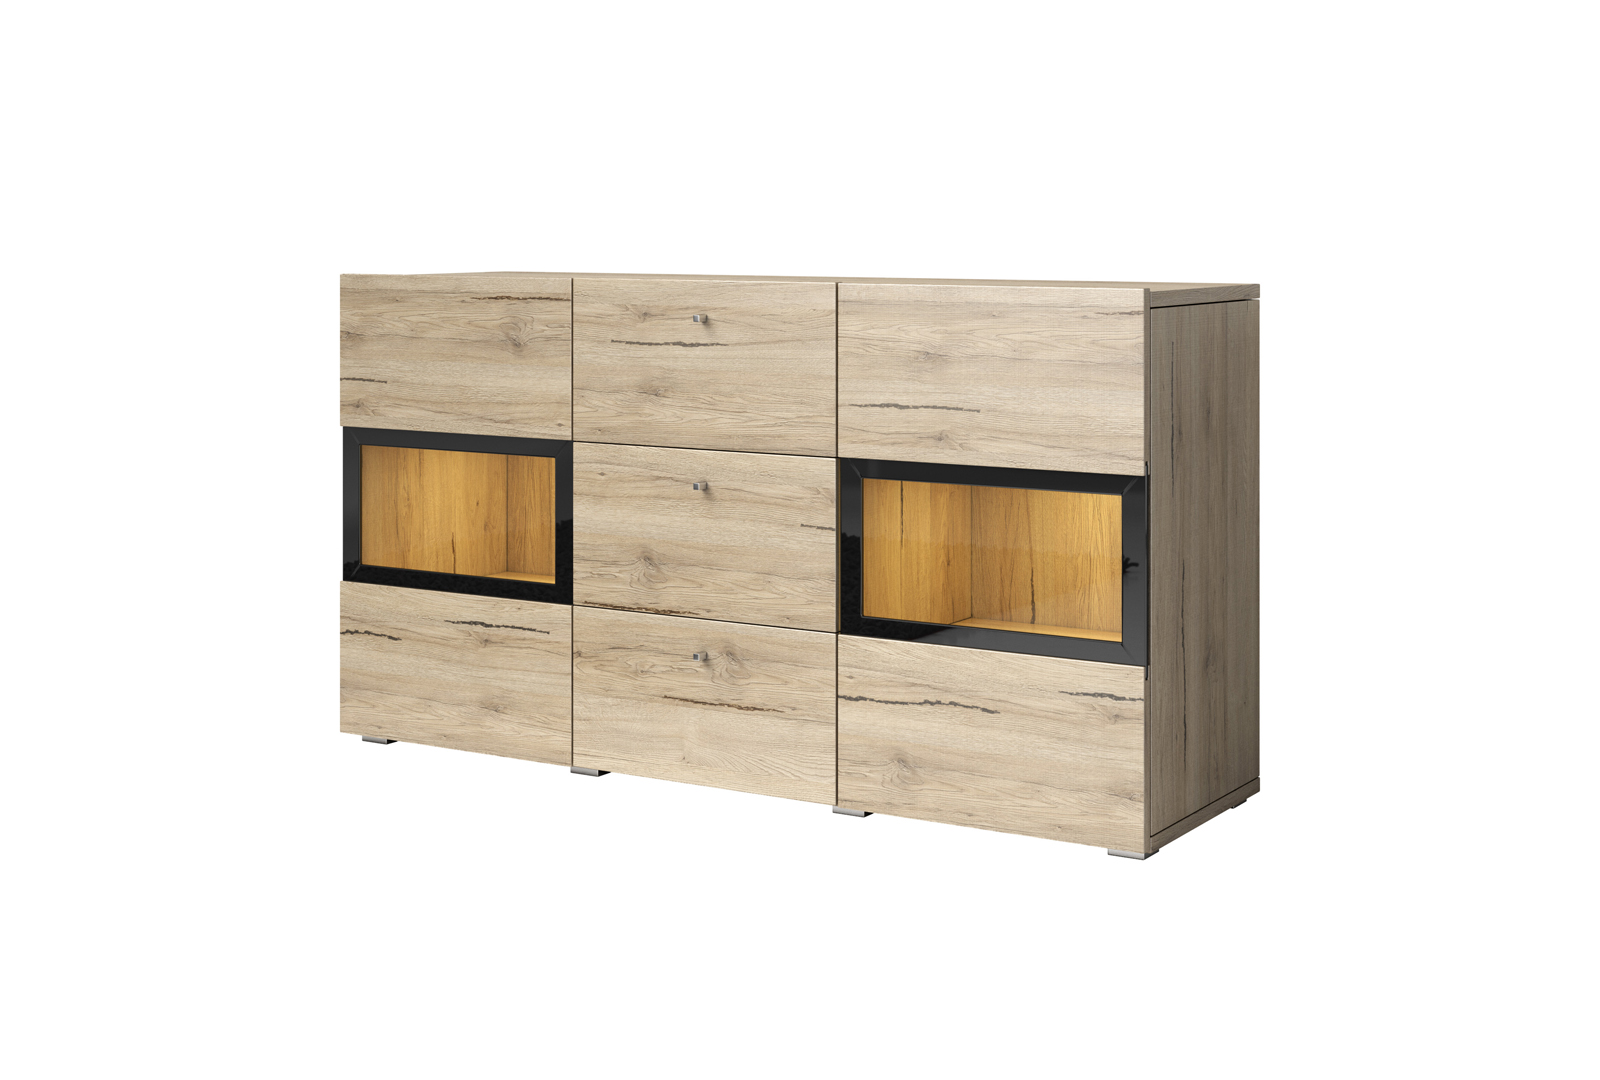 BAROS CHEST OF DRAWERS TYPE 26